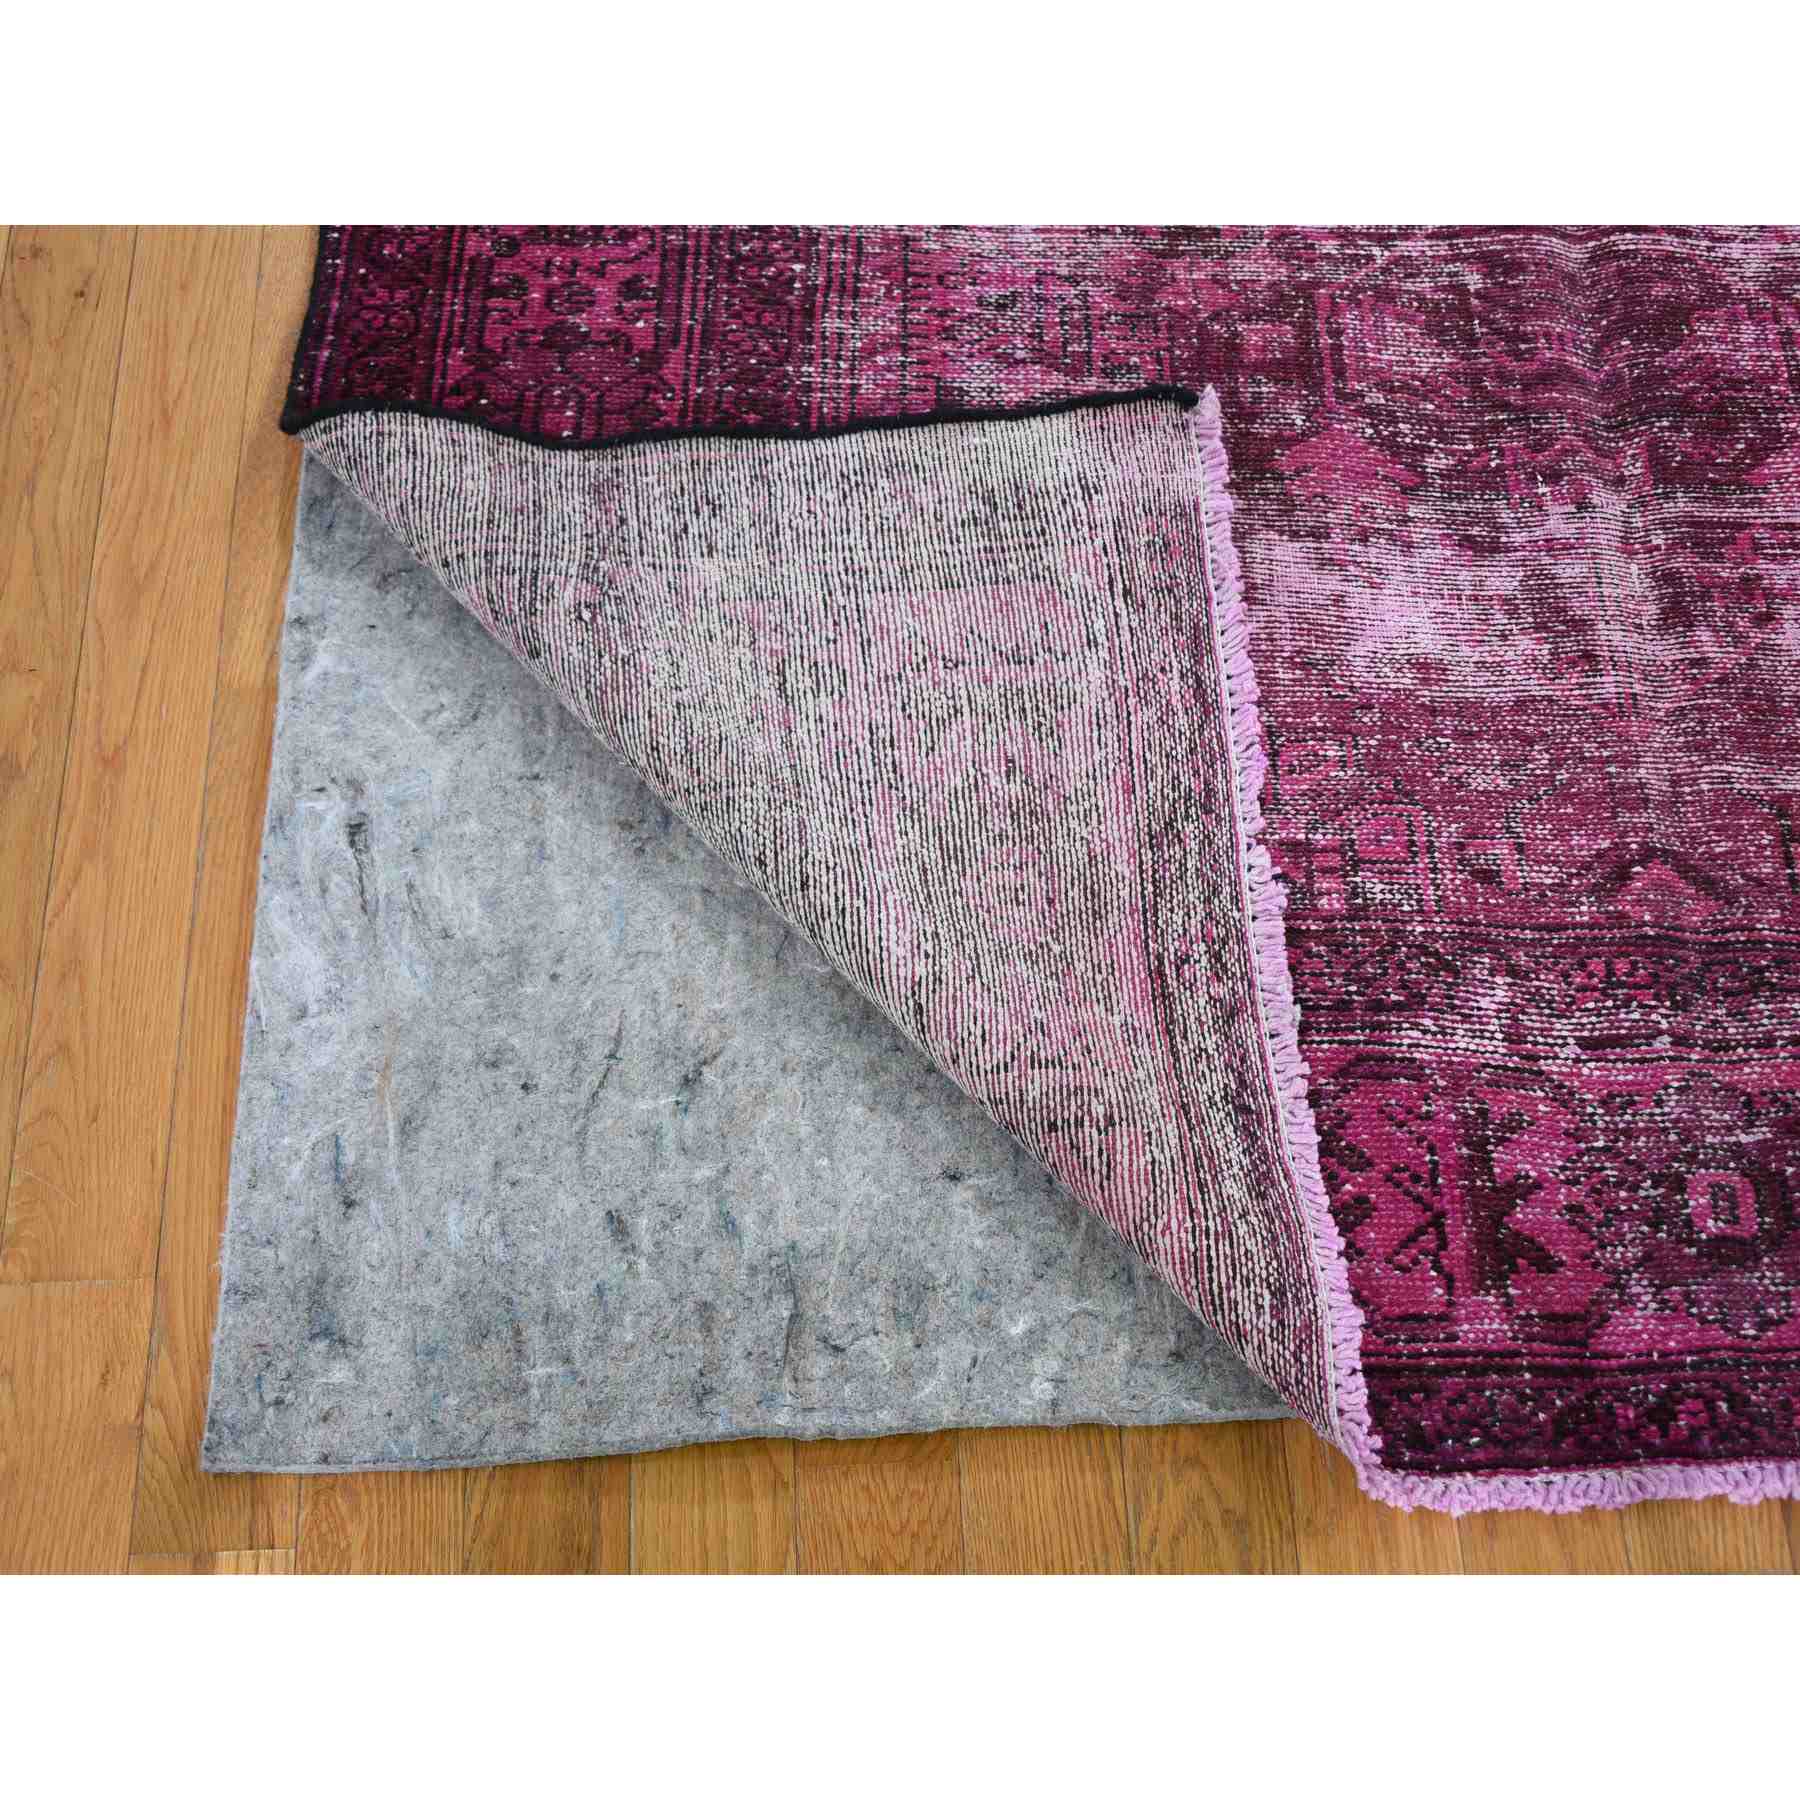 Overdyed-Vintage-Hand-Knotted-Rug-295955